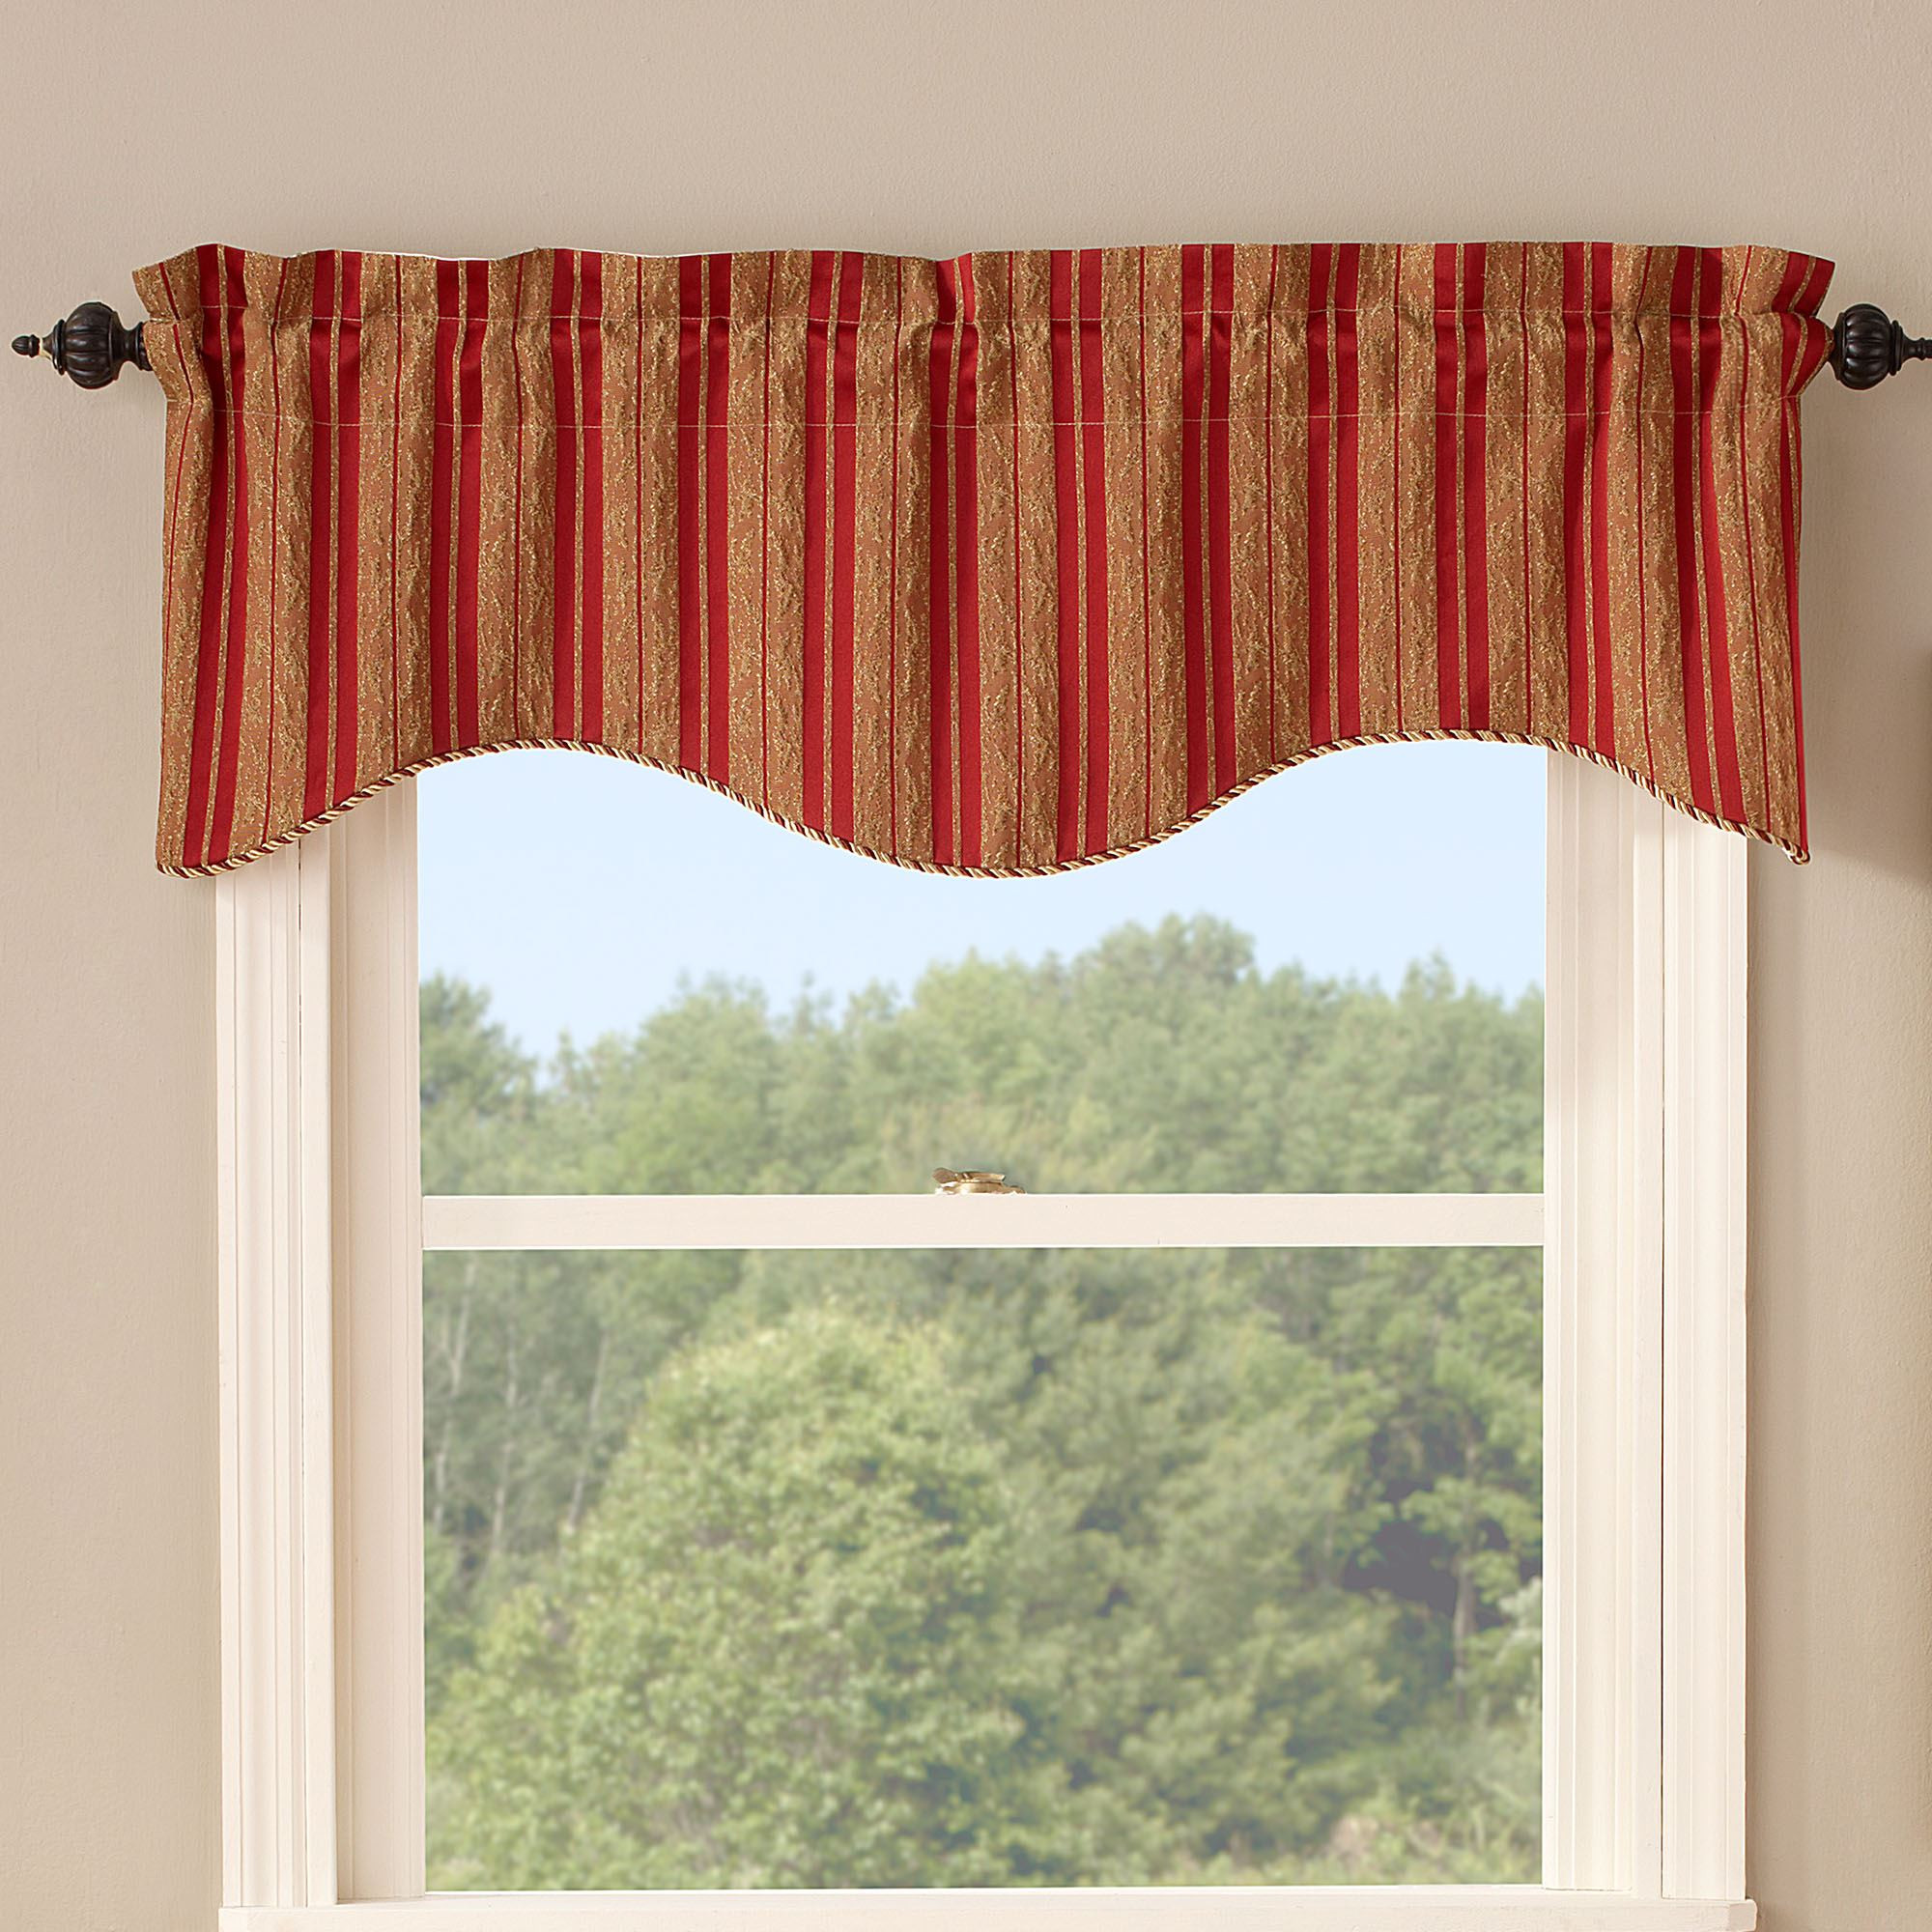 Striped Kitchen Curtains
 Cooper Striped Scalloped Window Valance